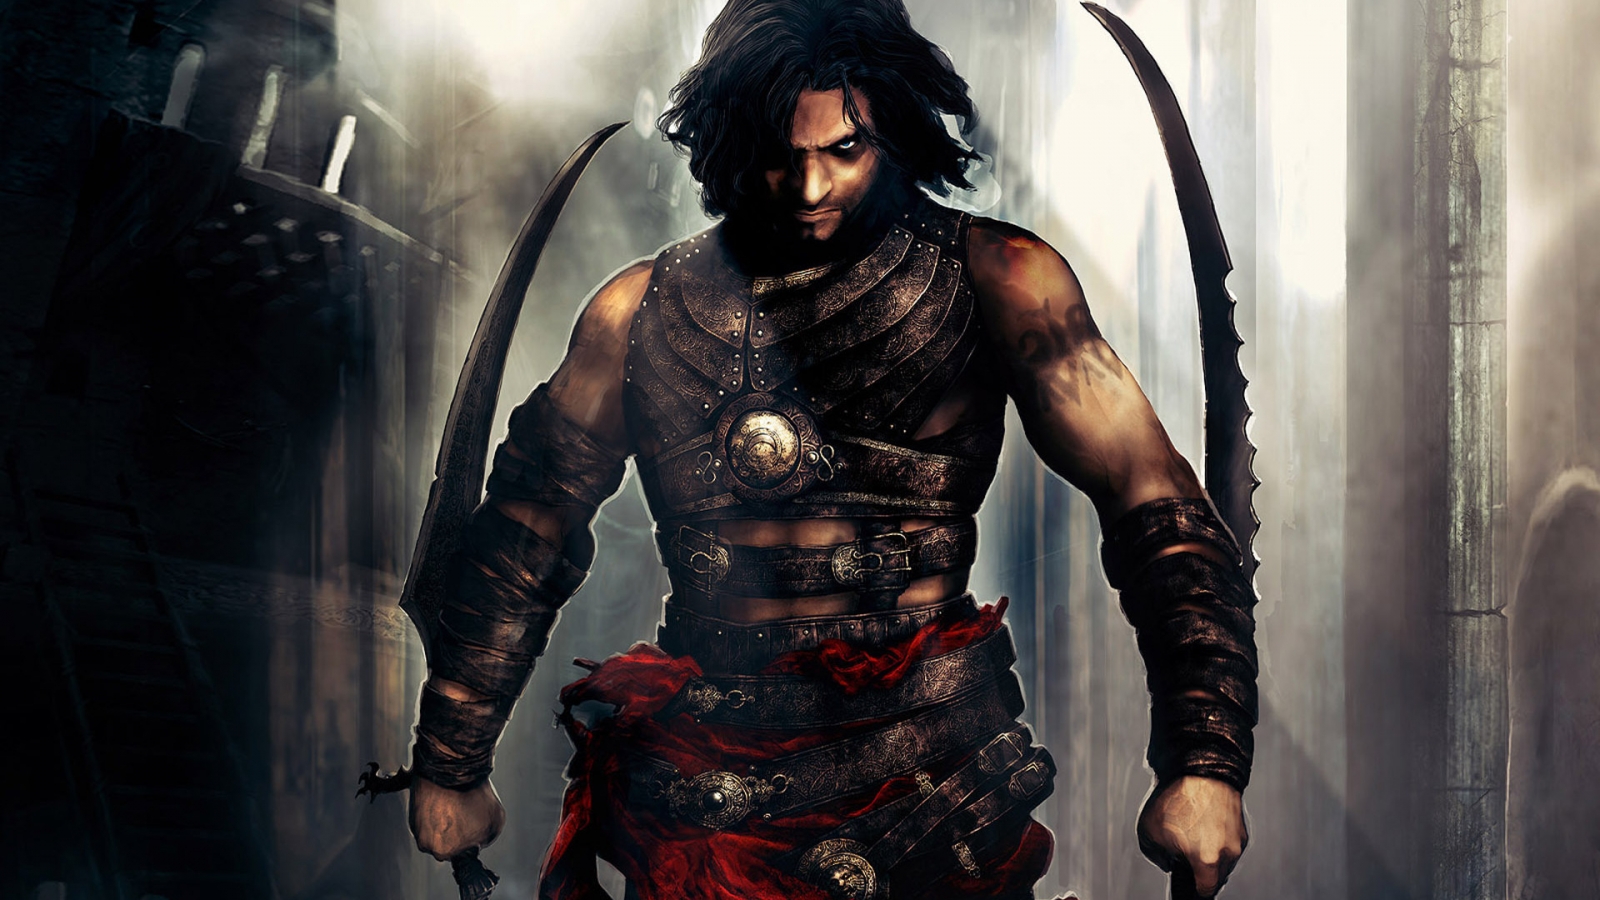 Prince of Persia Scene for 1600 x 900 HDTV resolution